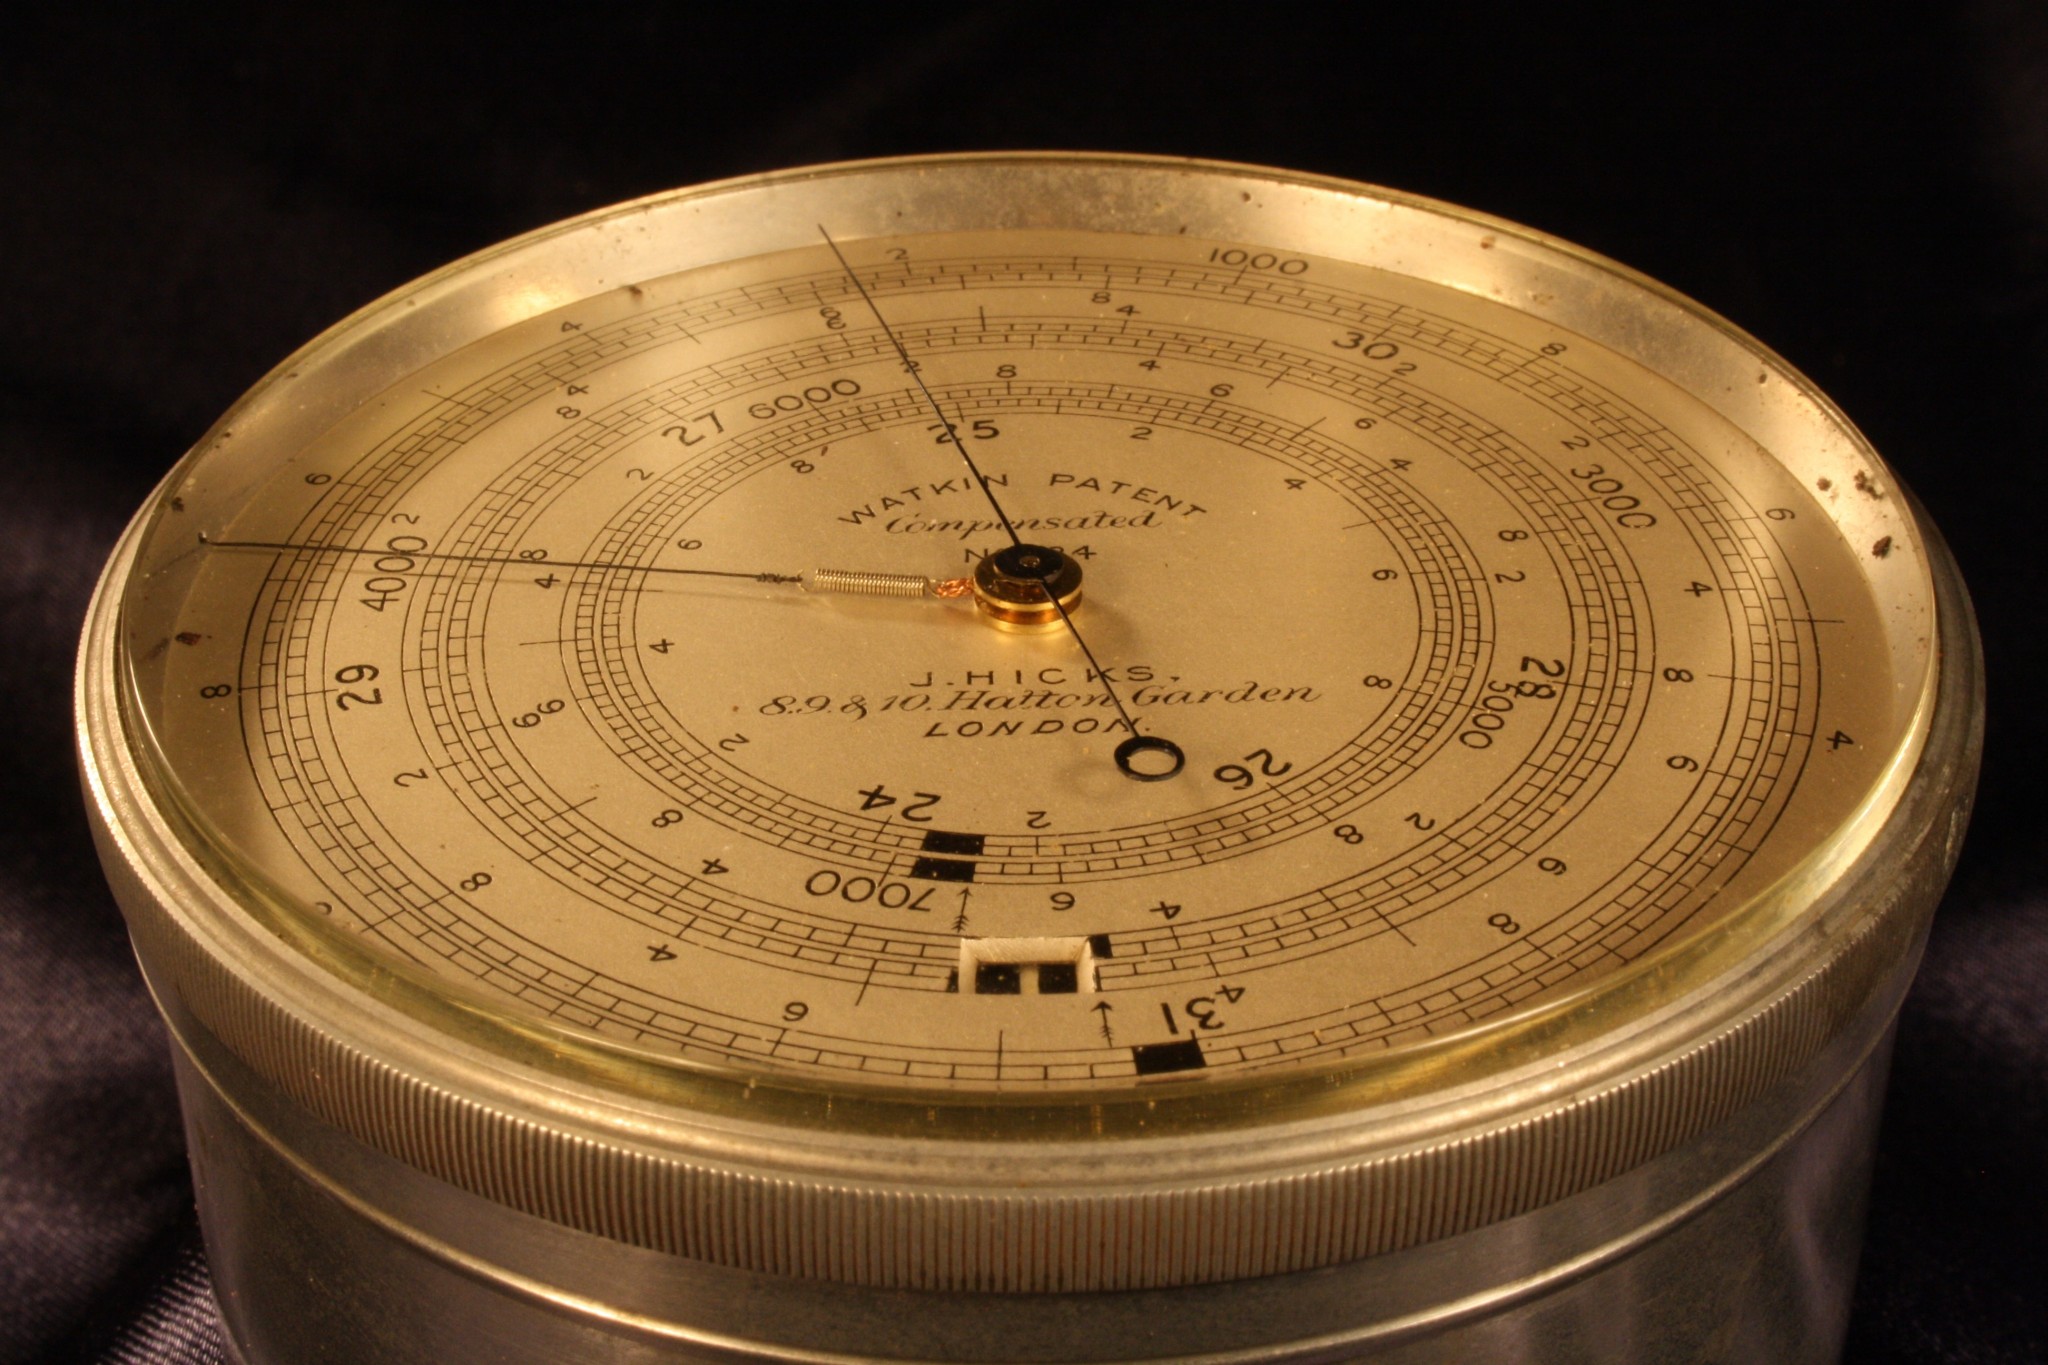 WATKIN PATENT EXTENDED SCALE BAROMETER ALTIMETER BY HICKS No 934 c1890